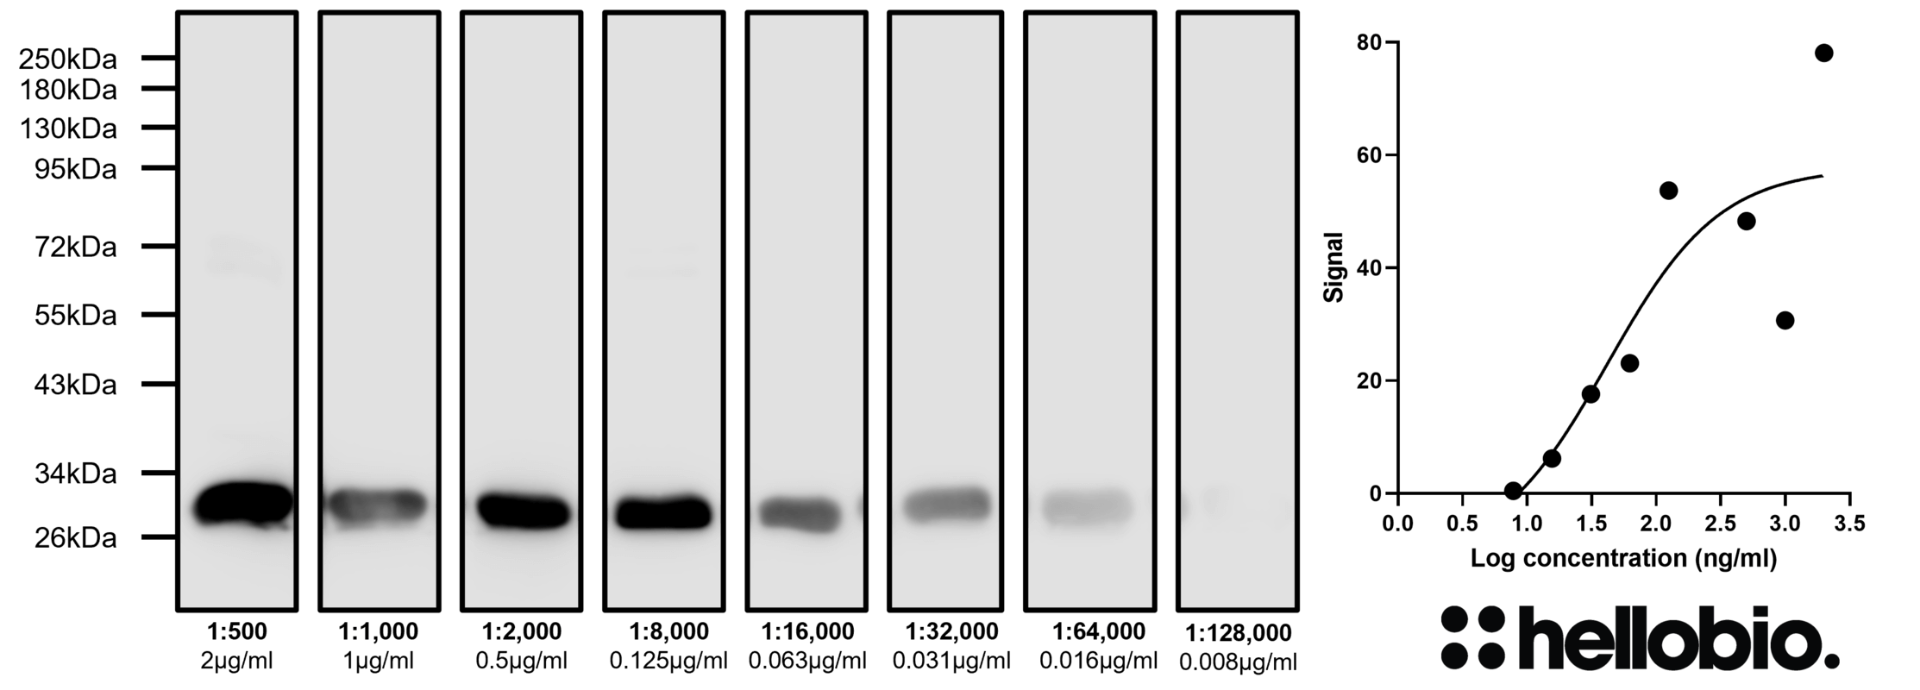 Figure 3. Concentration response of HB9897 staining in a rat brain cytosol preparation.